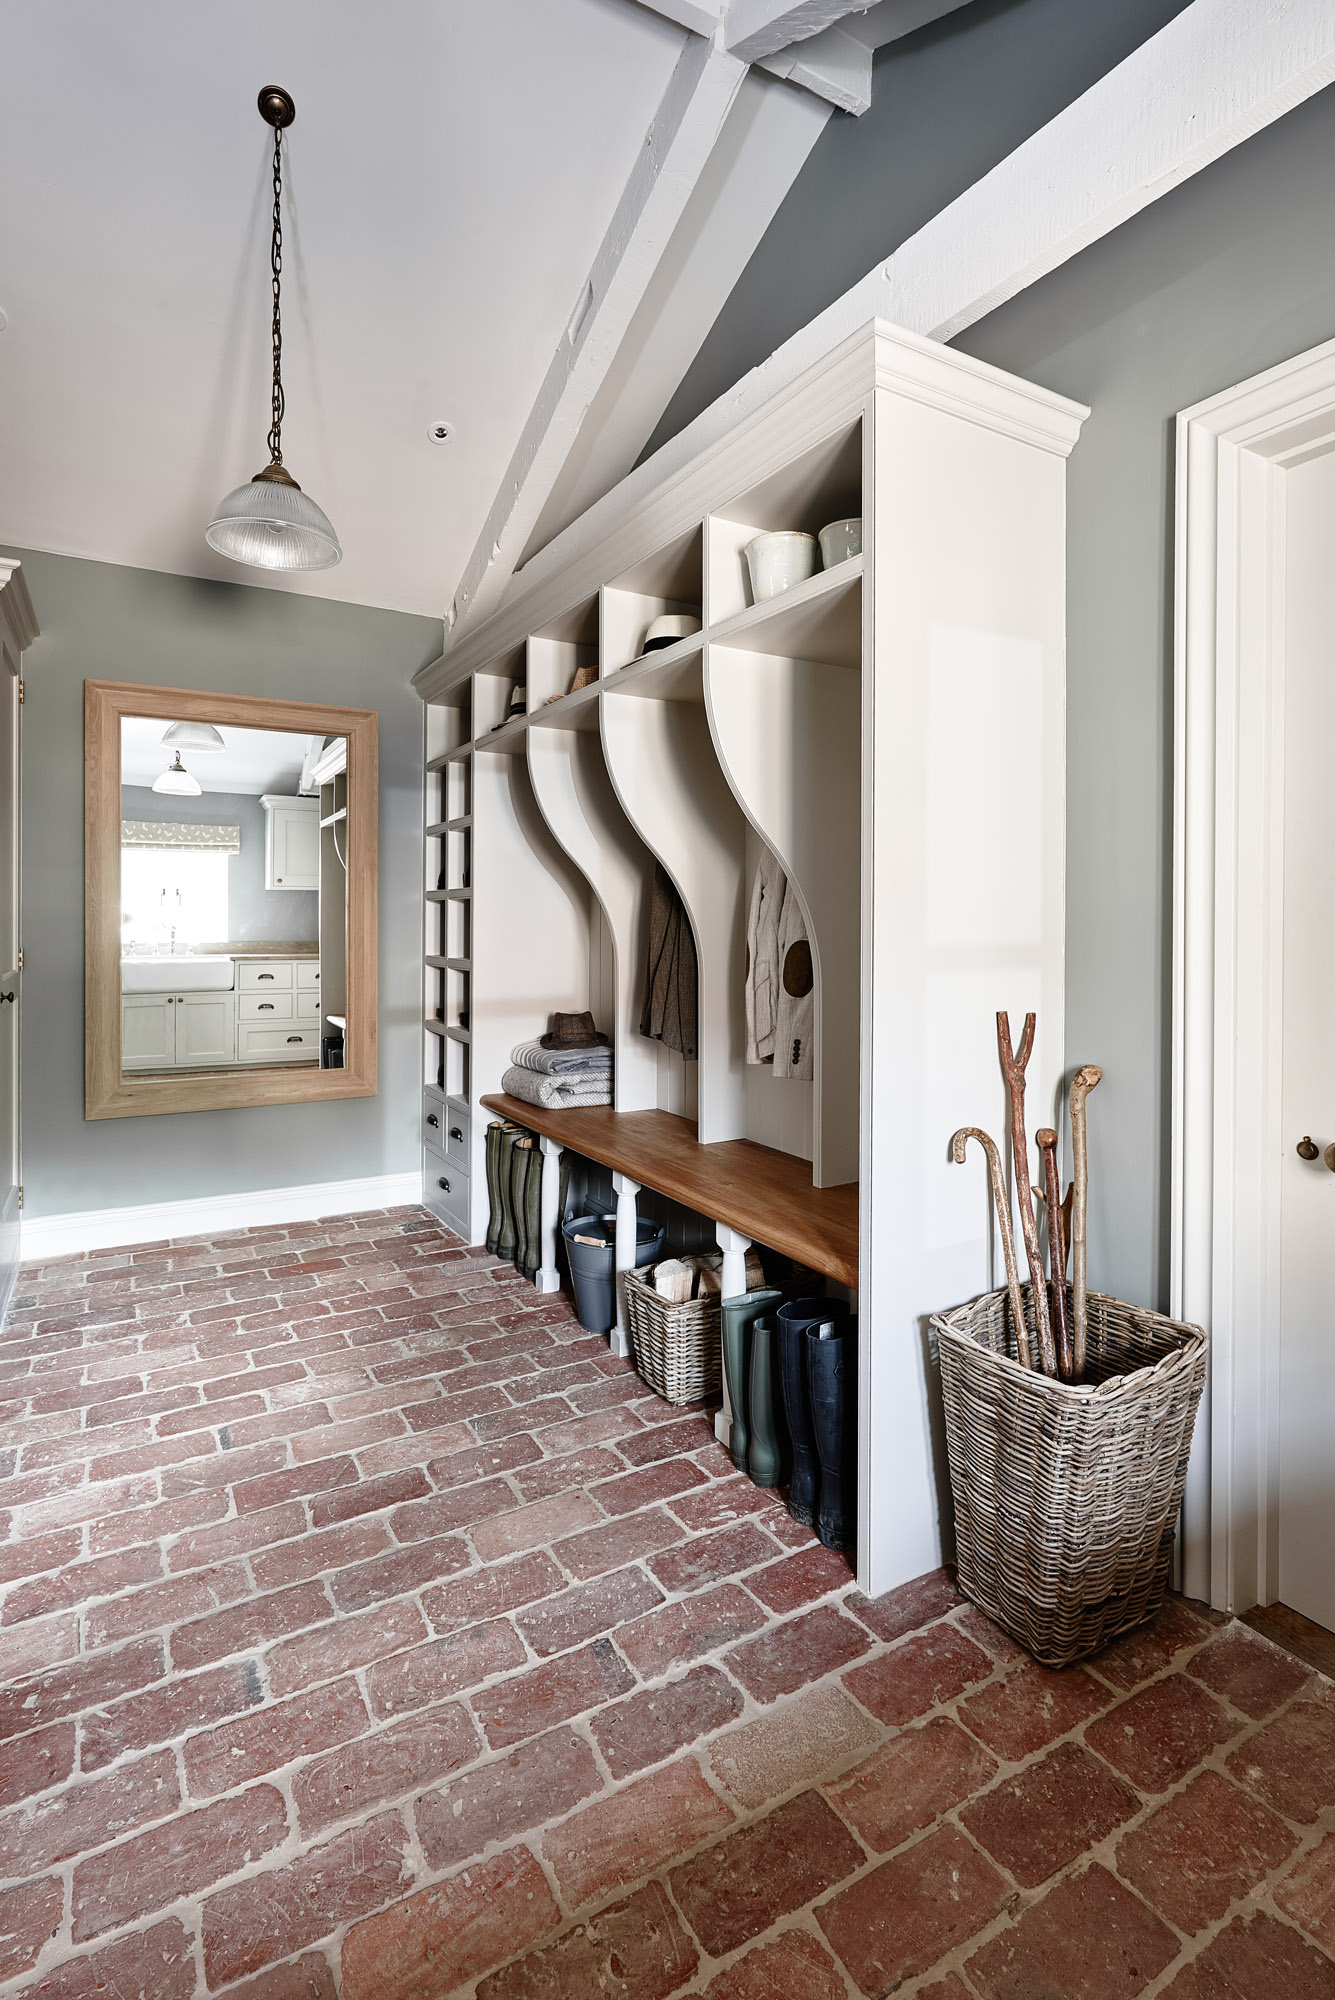 Mudroom with brick floor tile, grey walls and white cabinetry